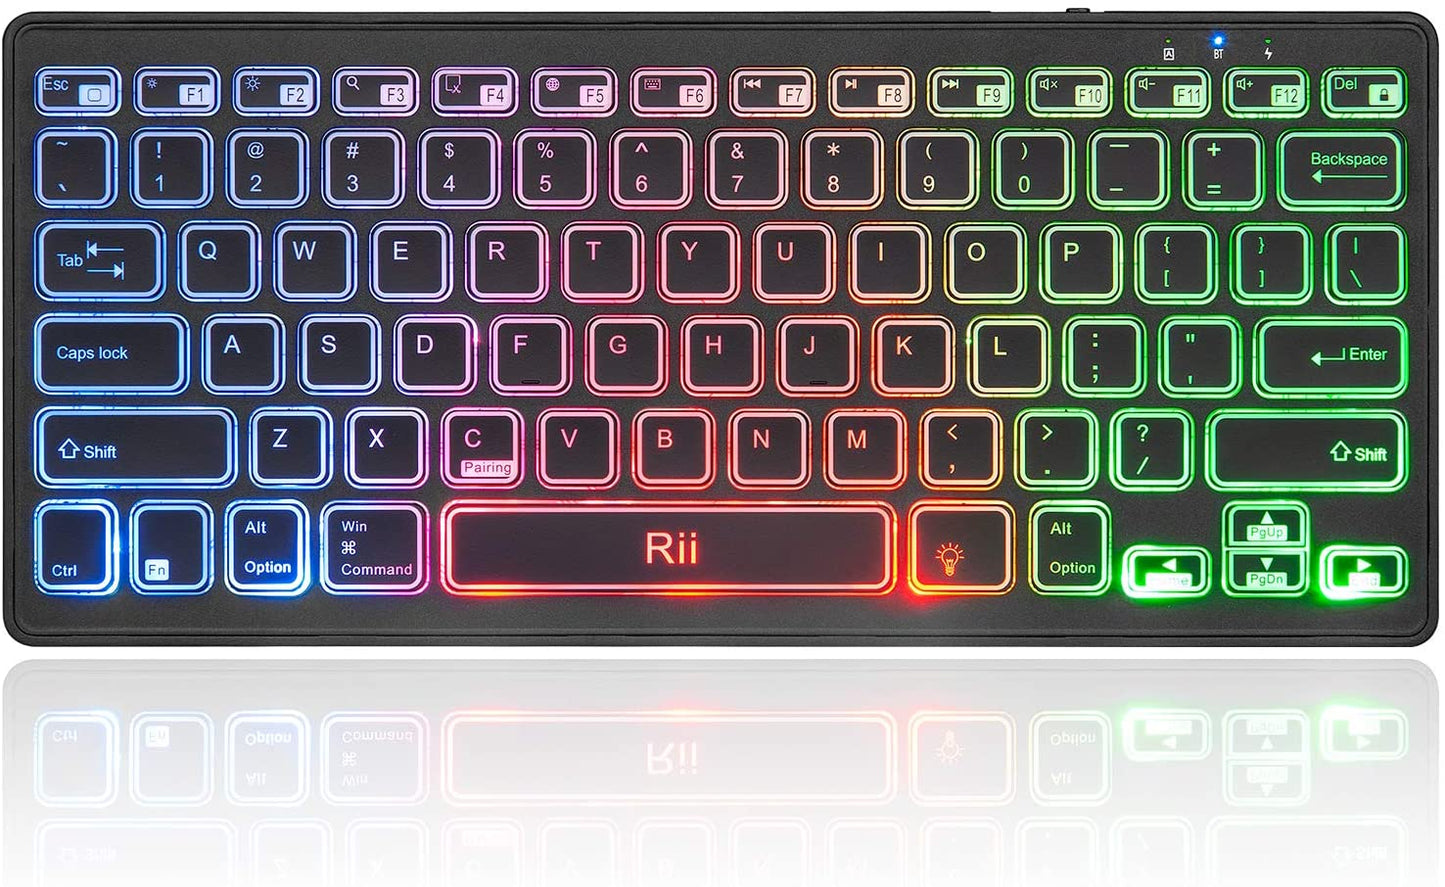 Rii Bluetooth 4.0 Wireless Multiple Color Rainbow LED Backlit Keyboard With Rechargeable Battery For iOS Android and Windows Tablet PC Laptop Notebook MacBook - Home Decor Gifts and More